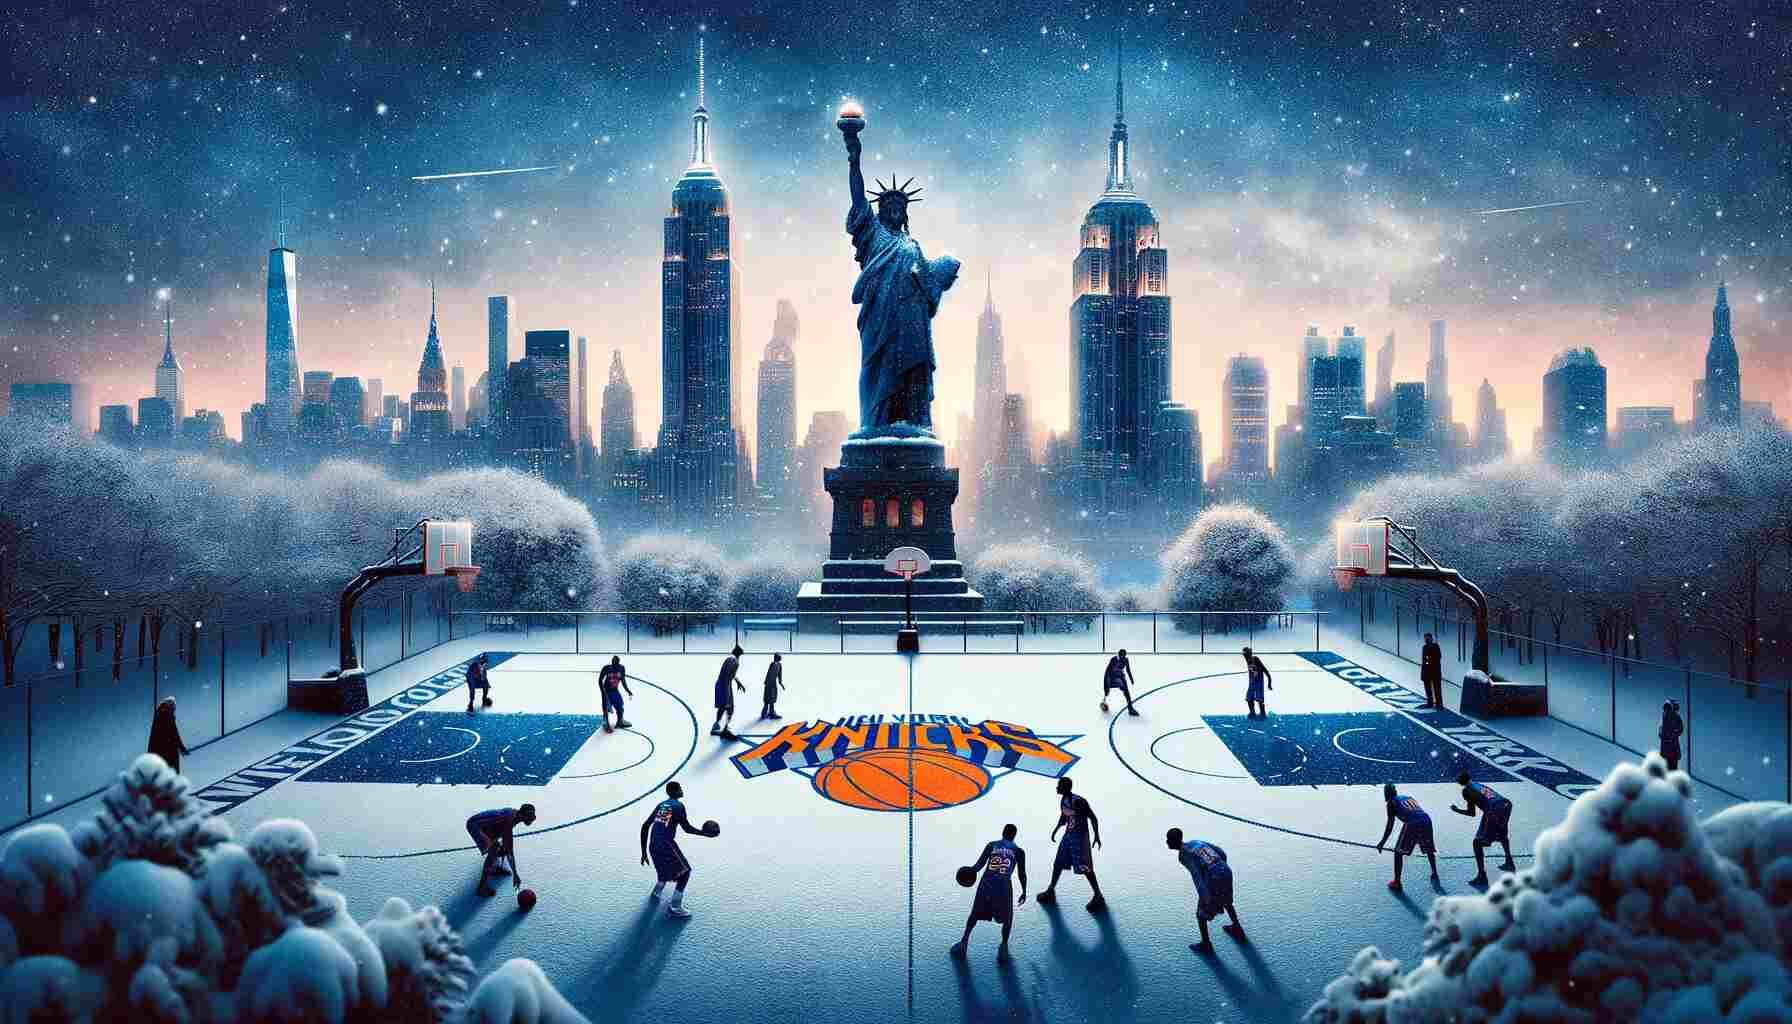 Here is the featured image for The Knicks and New York's Winter Wonderland: Embracing the Cold in the Midst of Trade Talks, showcasing an artistic view of New York City in winter with the essence of the New York Knicks.